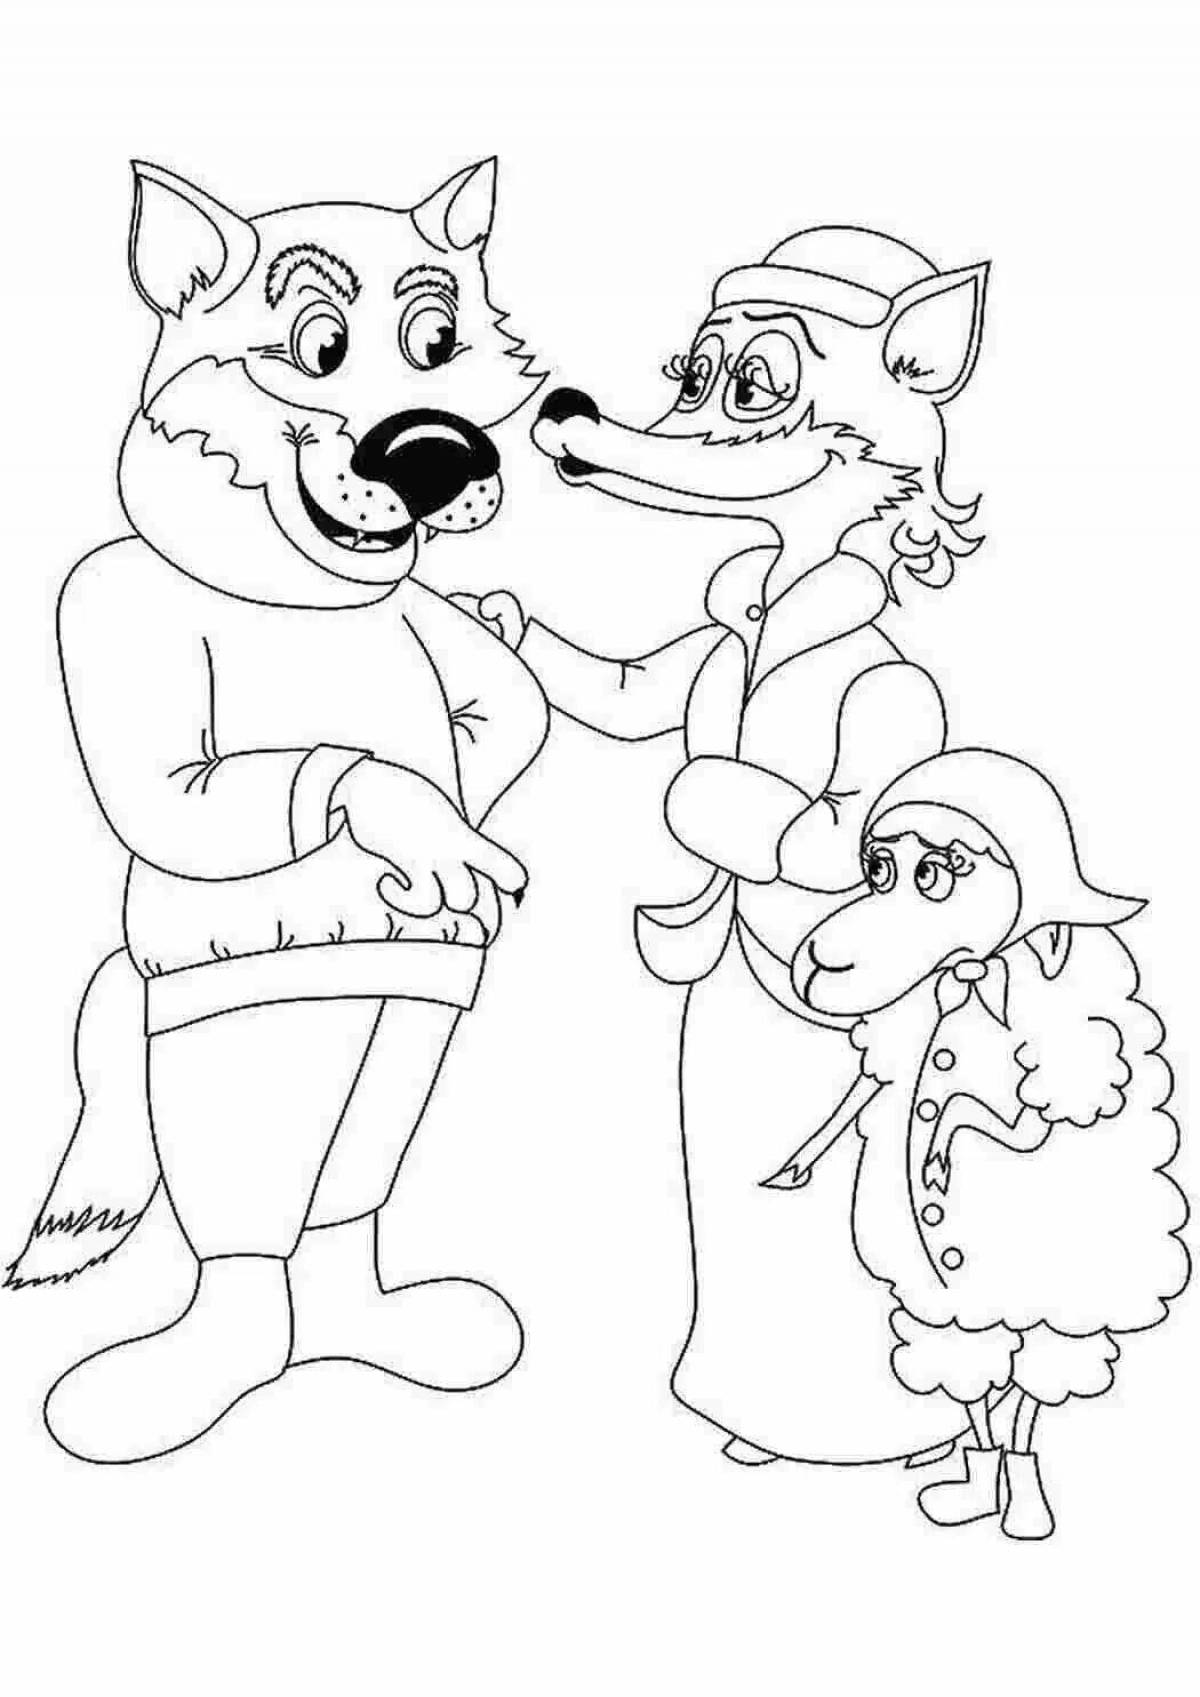 Amazing lamb and wolf coloring book